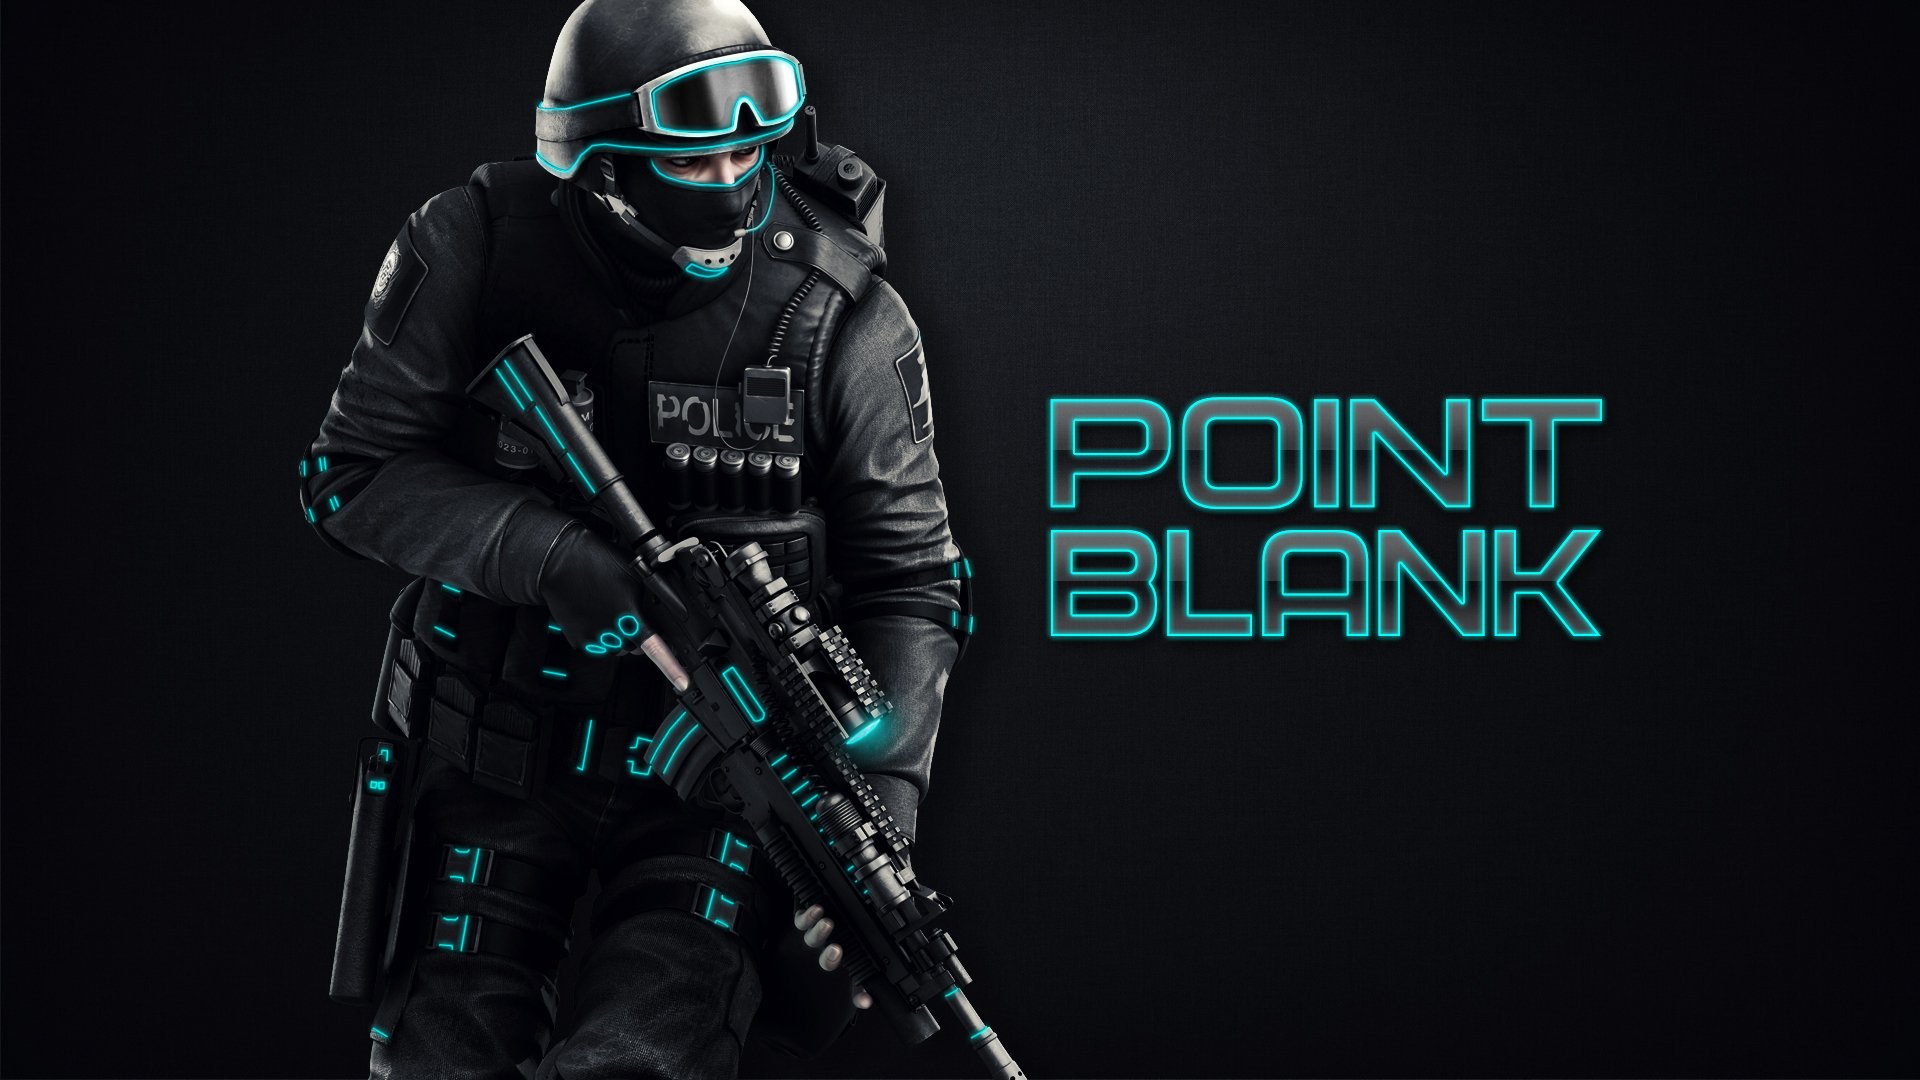 Point Blank Backgrounds, Compatible - PC, Mobile, Gadgets| 1920x1080 px